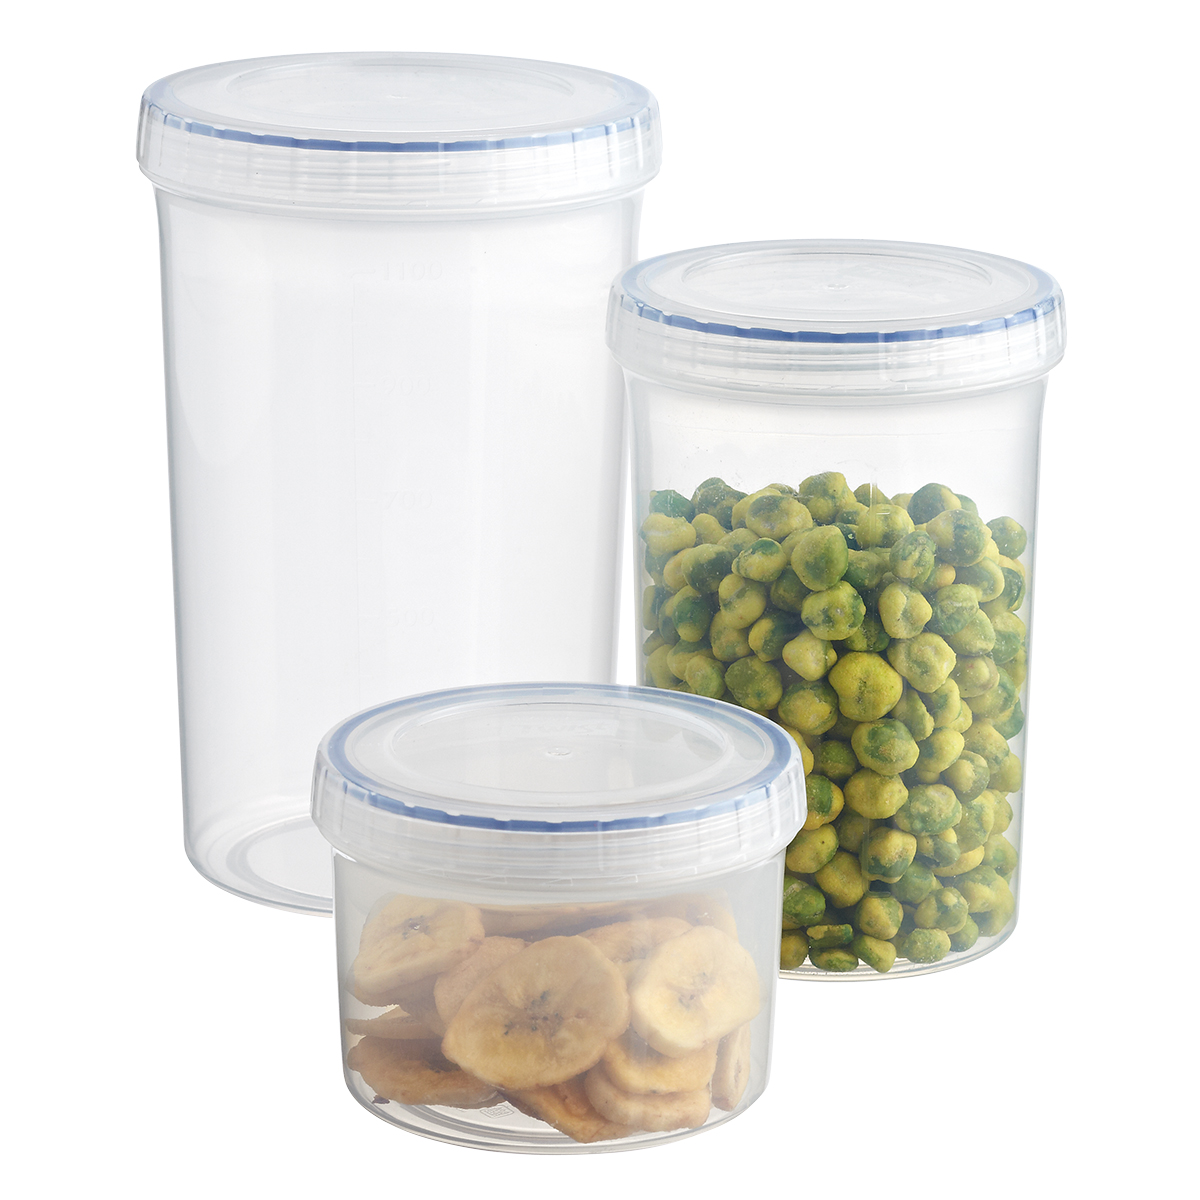 Twist and Store Large Round Food Storage Container - 2ct/32 fl oz